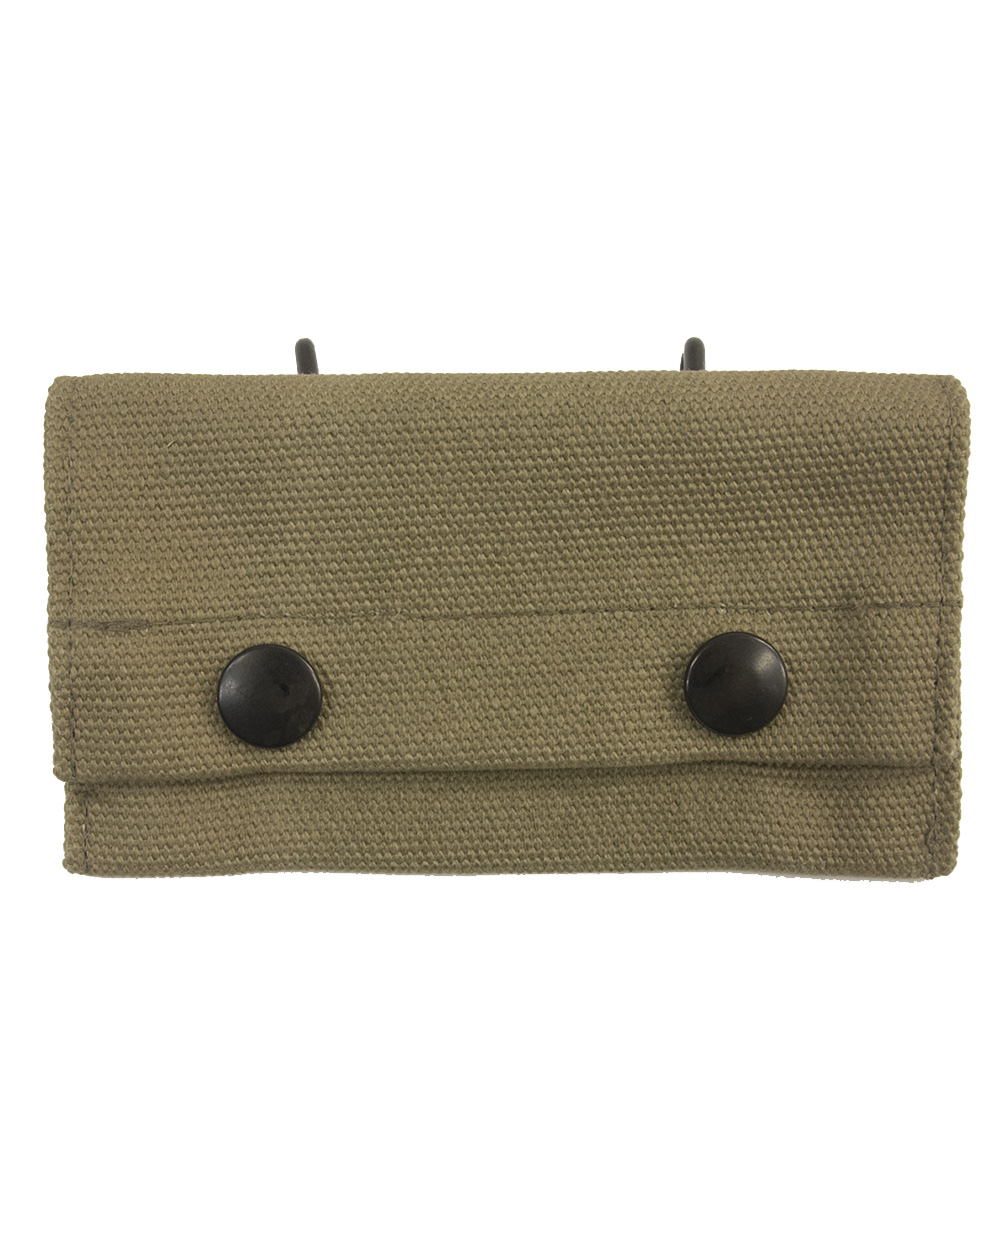 WWI US M1910 FIRST AID CARRY POUCH-PEA GREEN 